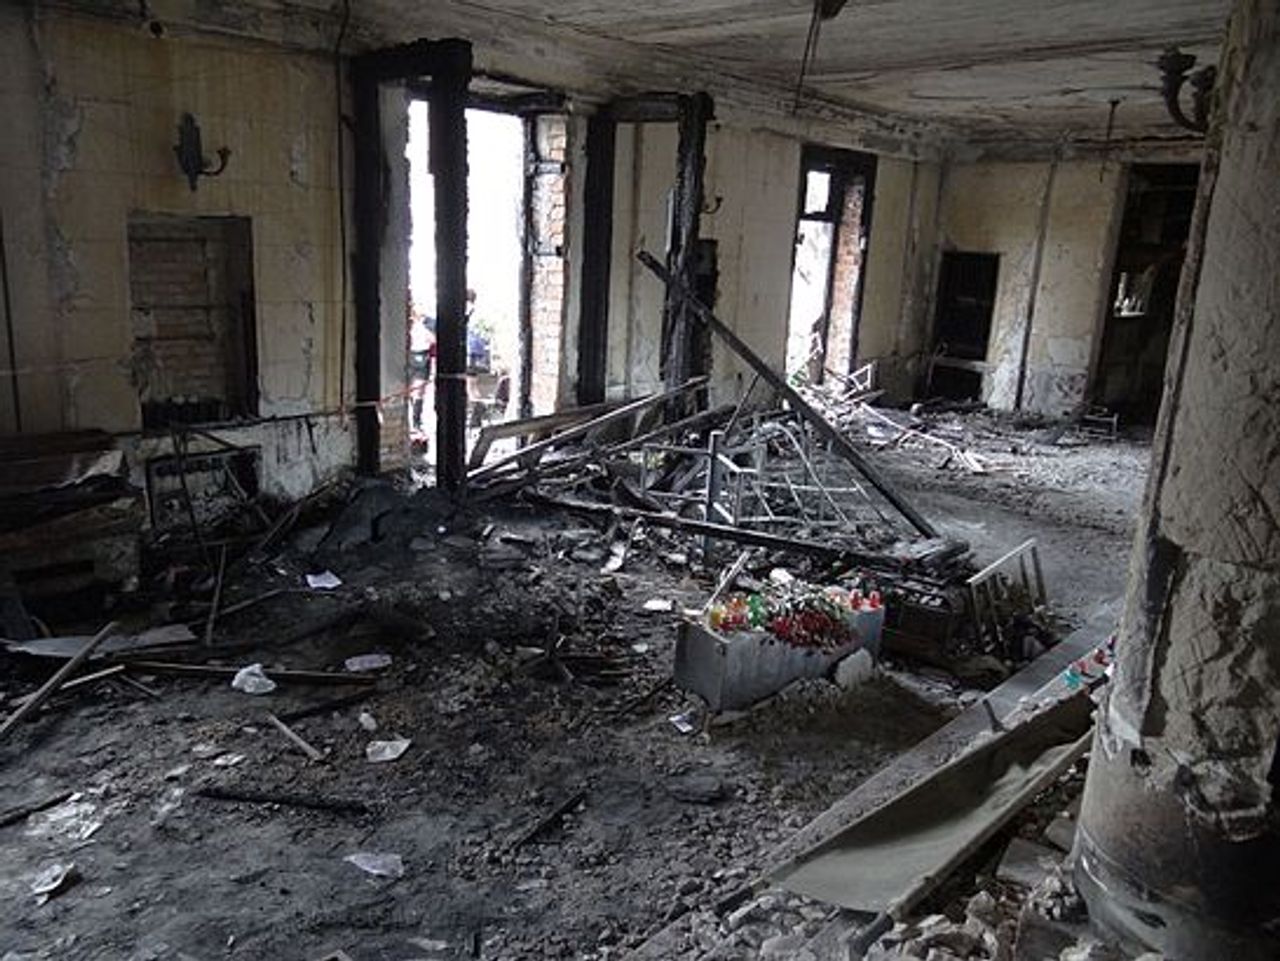 The Trade Union house in Odessa after the fire and massacre in 2014. [Photo by Lsimon / CC BY-NC-SA 4.0]